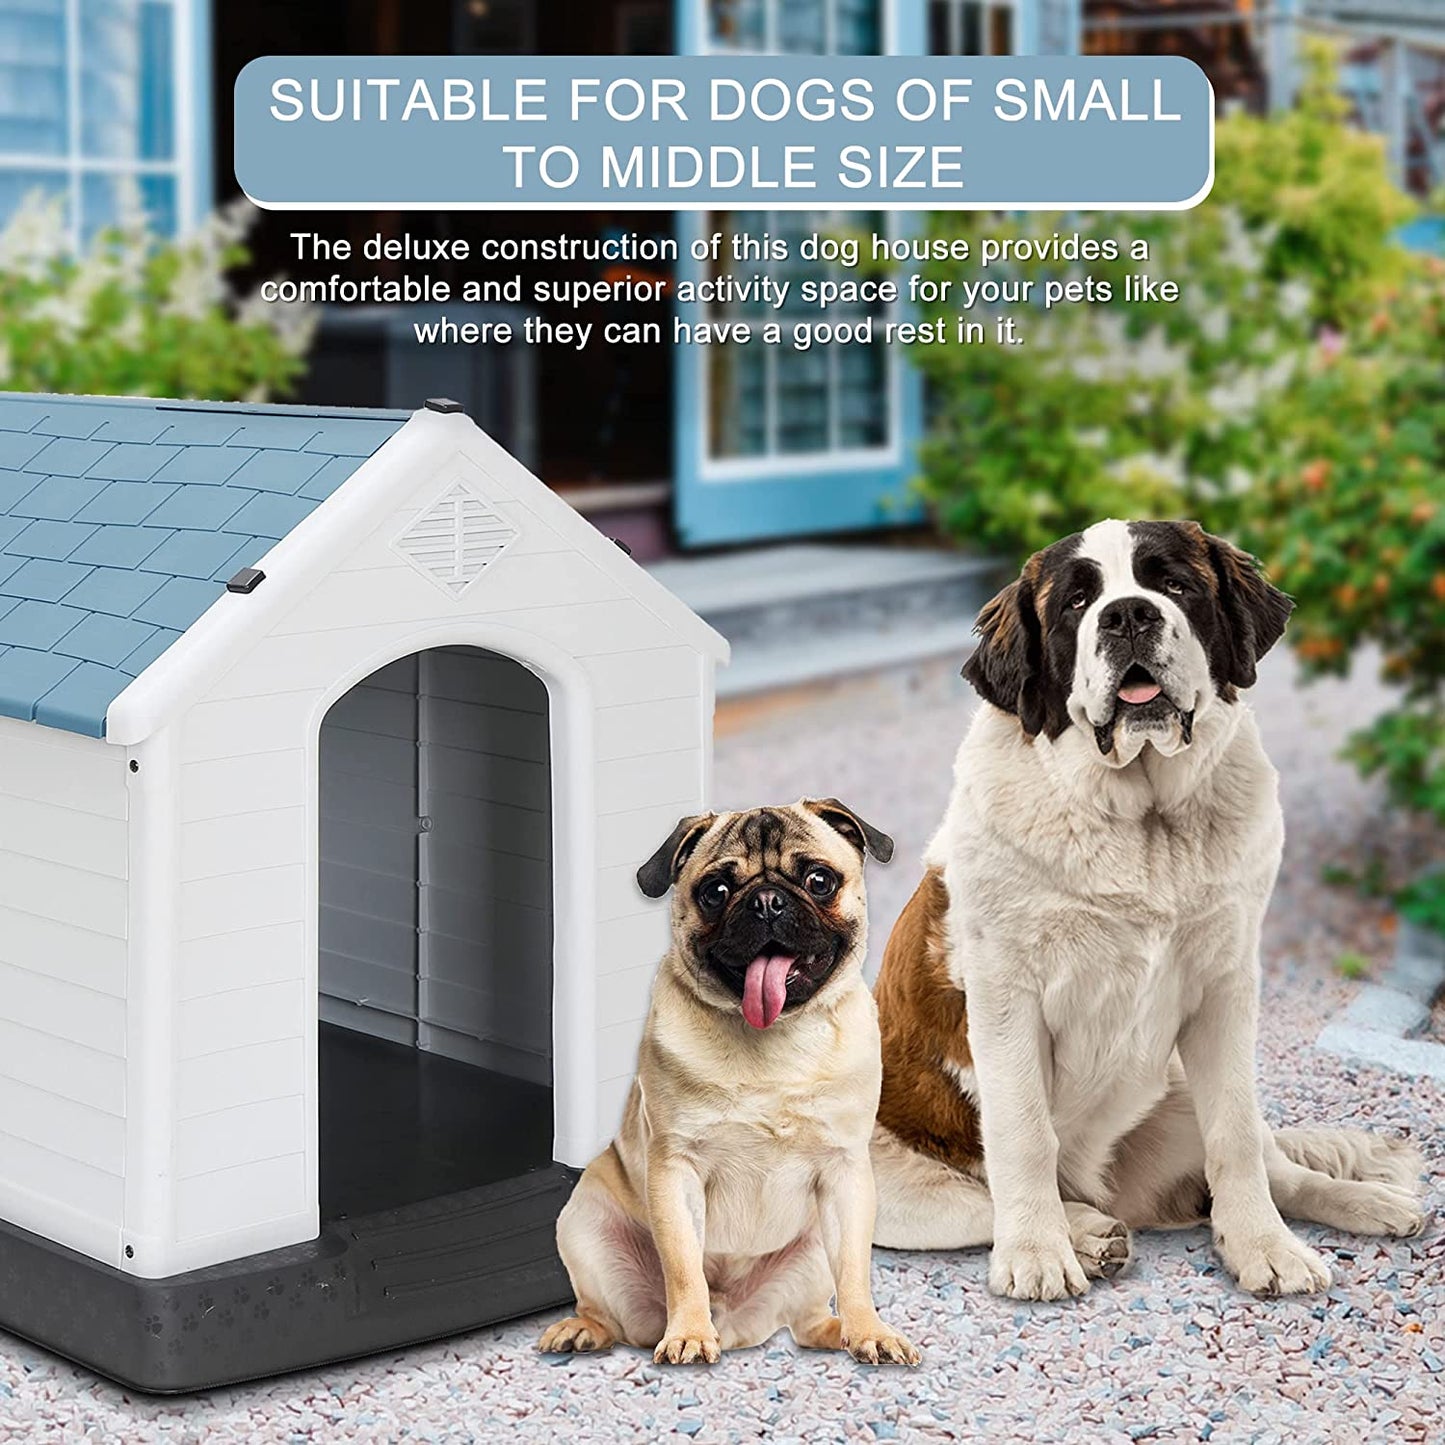 EXTFIT Plastic Dog House - Water Resistant Dog Kennel for Small to Medium Sized Dogs All Weather Indoor Outdoor Doghouse Puppy Shelter